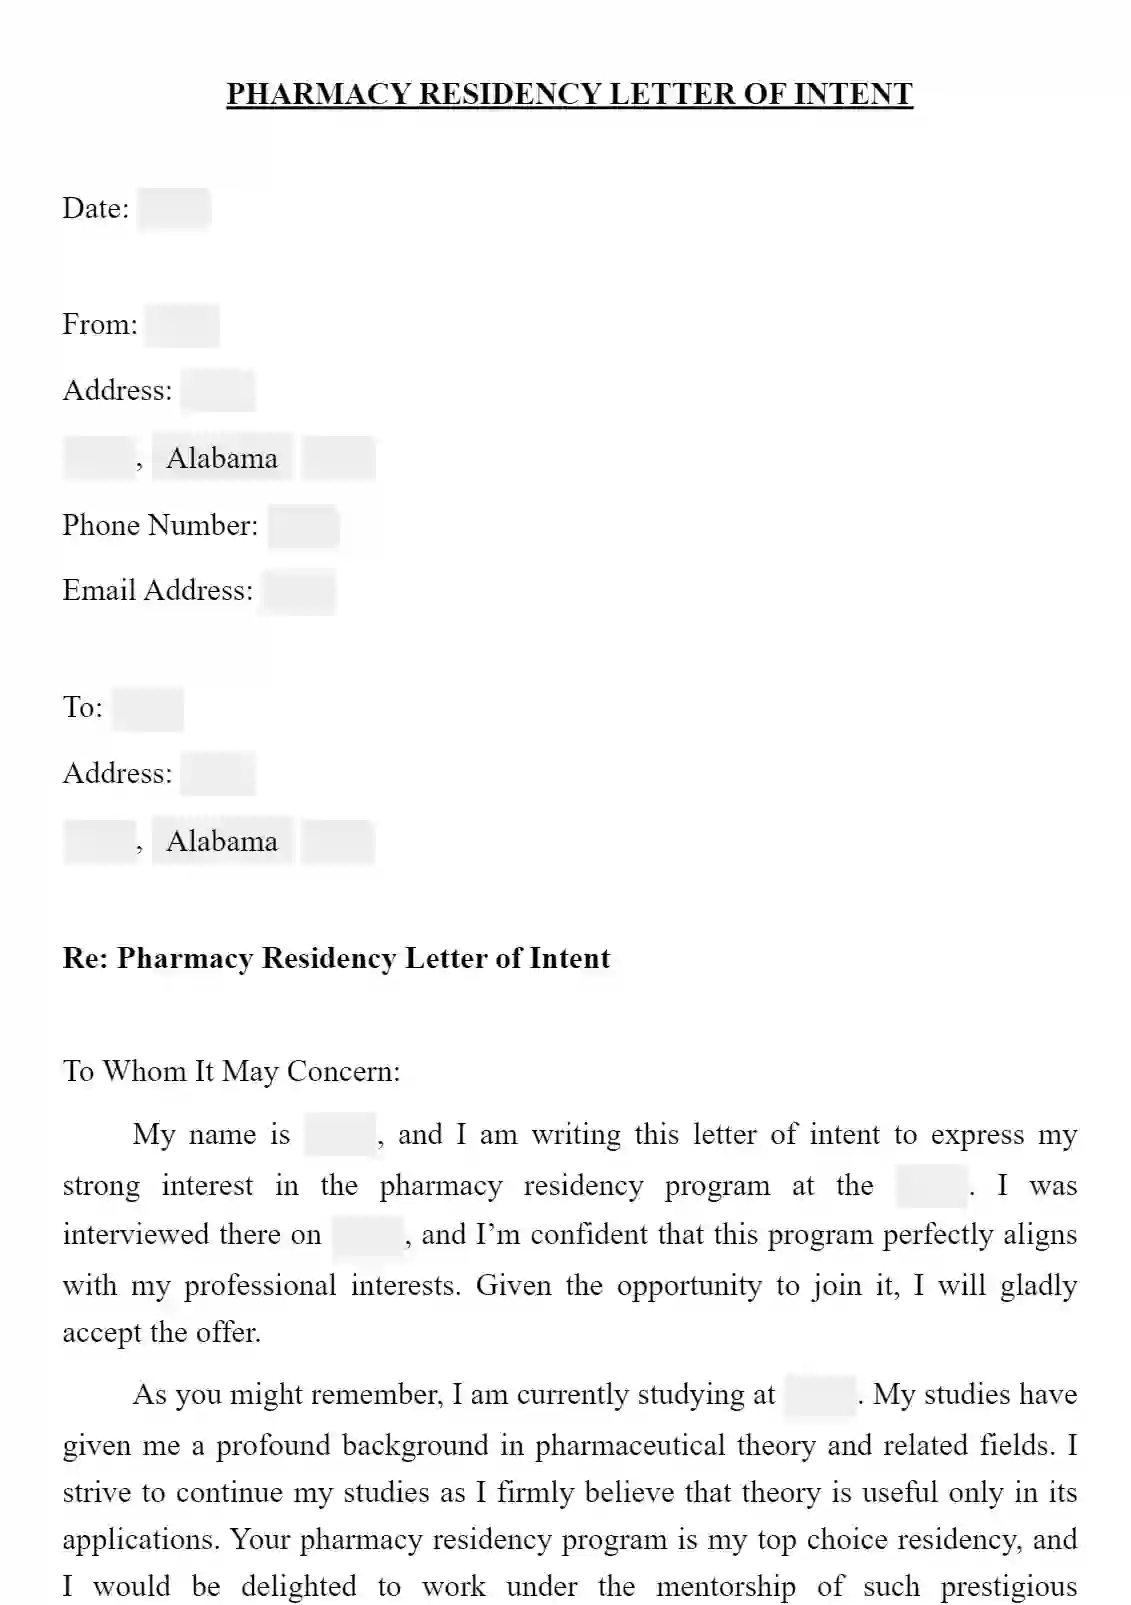 Free Pharmacy Residency Letter Of Intent Example FormsPal